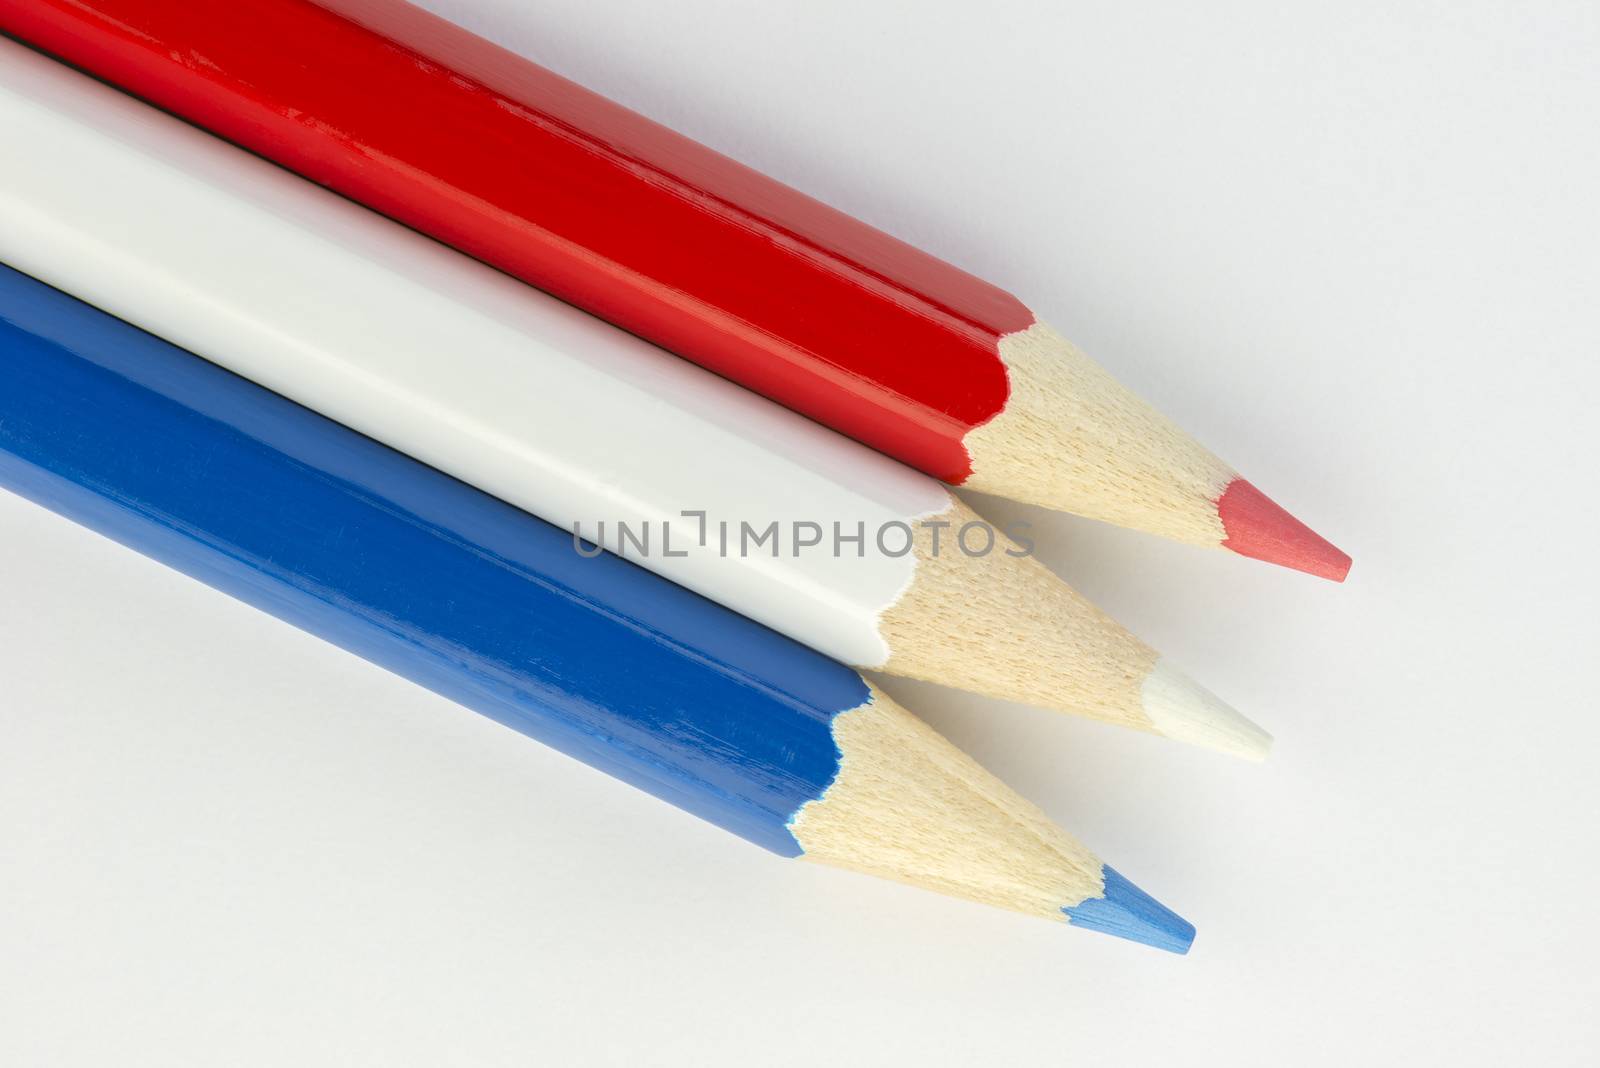 Collection of colorful pencils in Dutch flag colors red white and blue as a background picture
